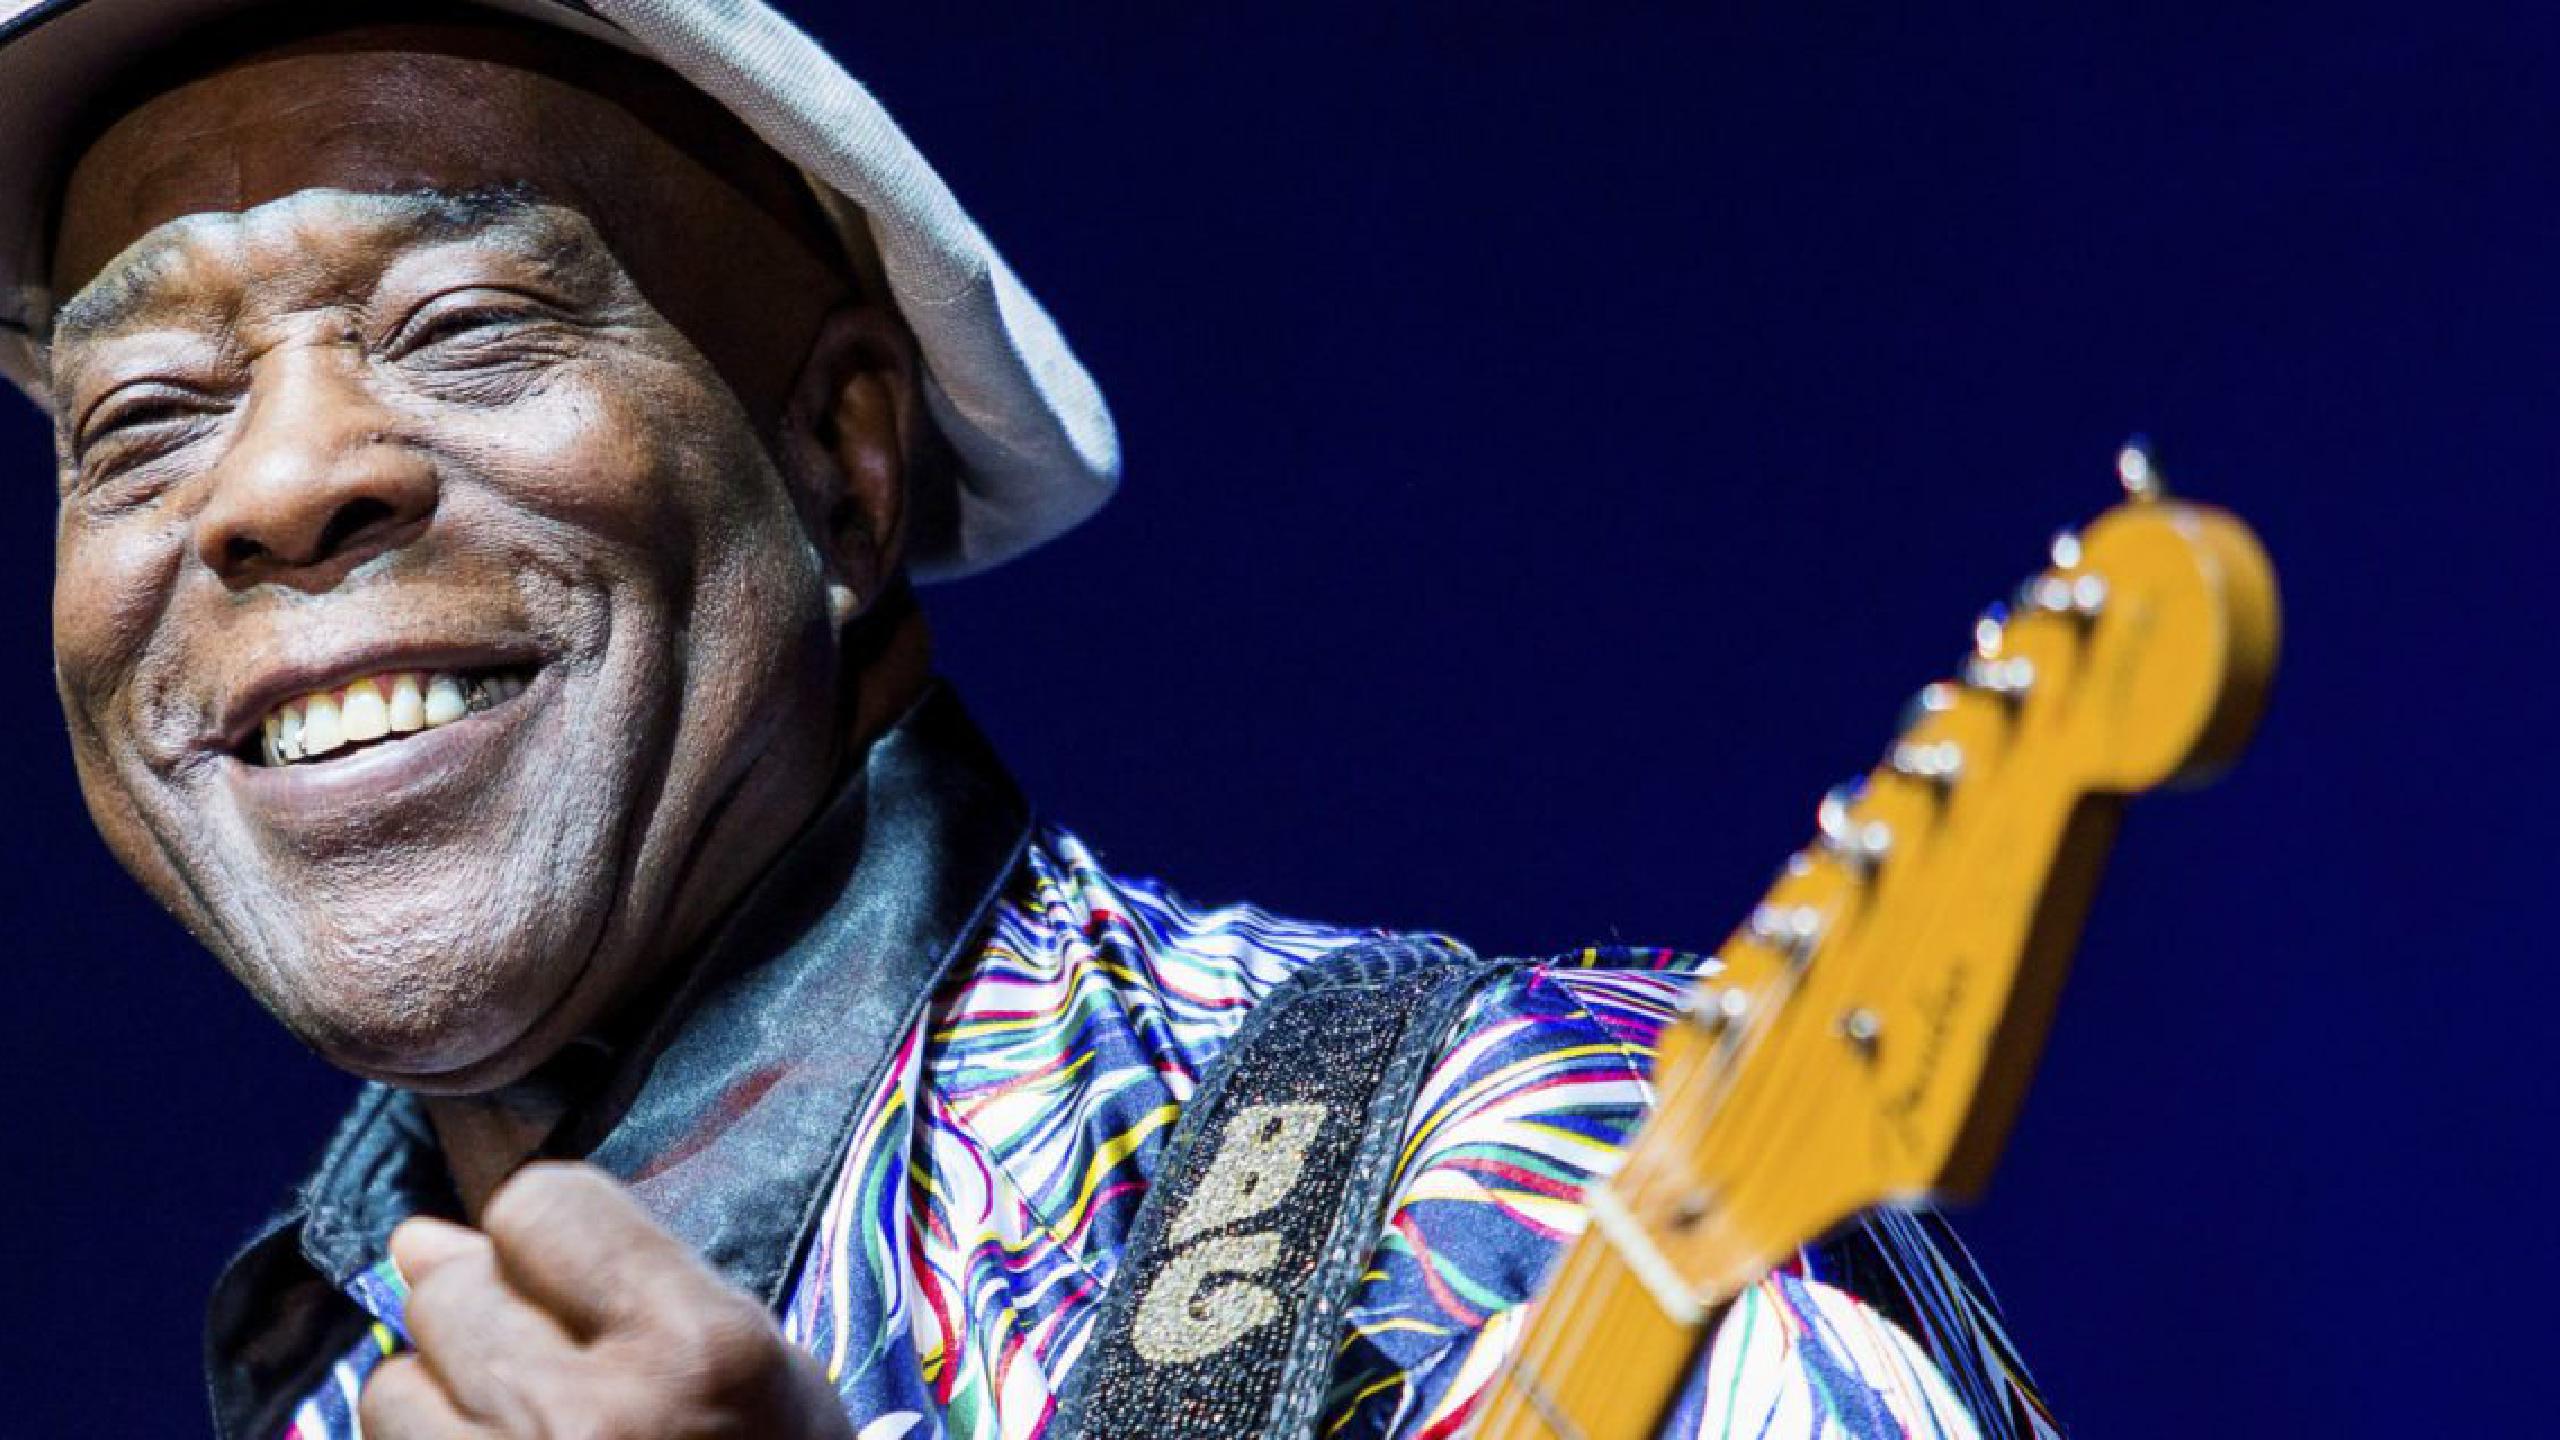 buddy guy tour 2023 cancelled shows